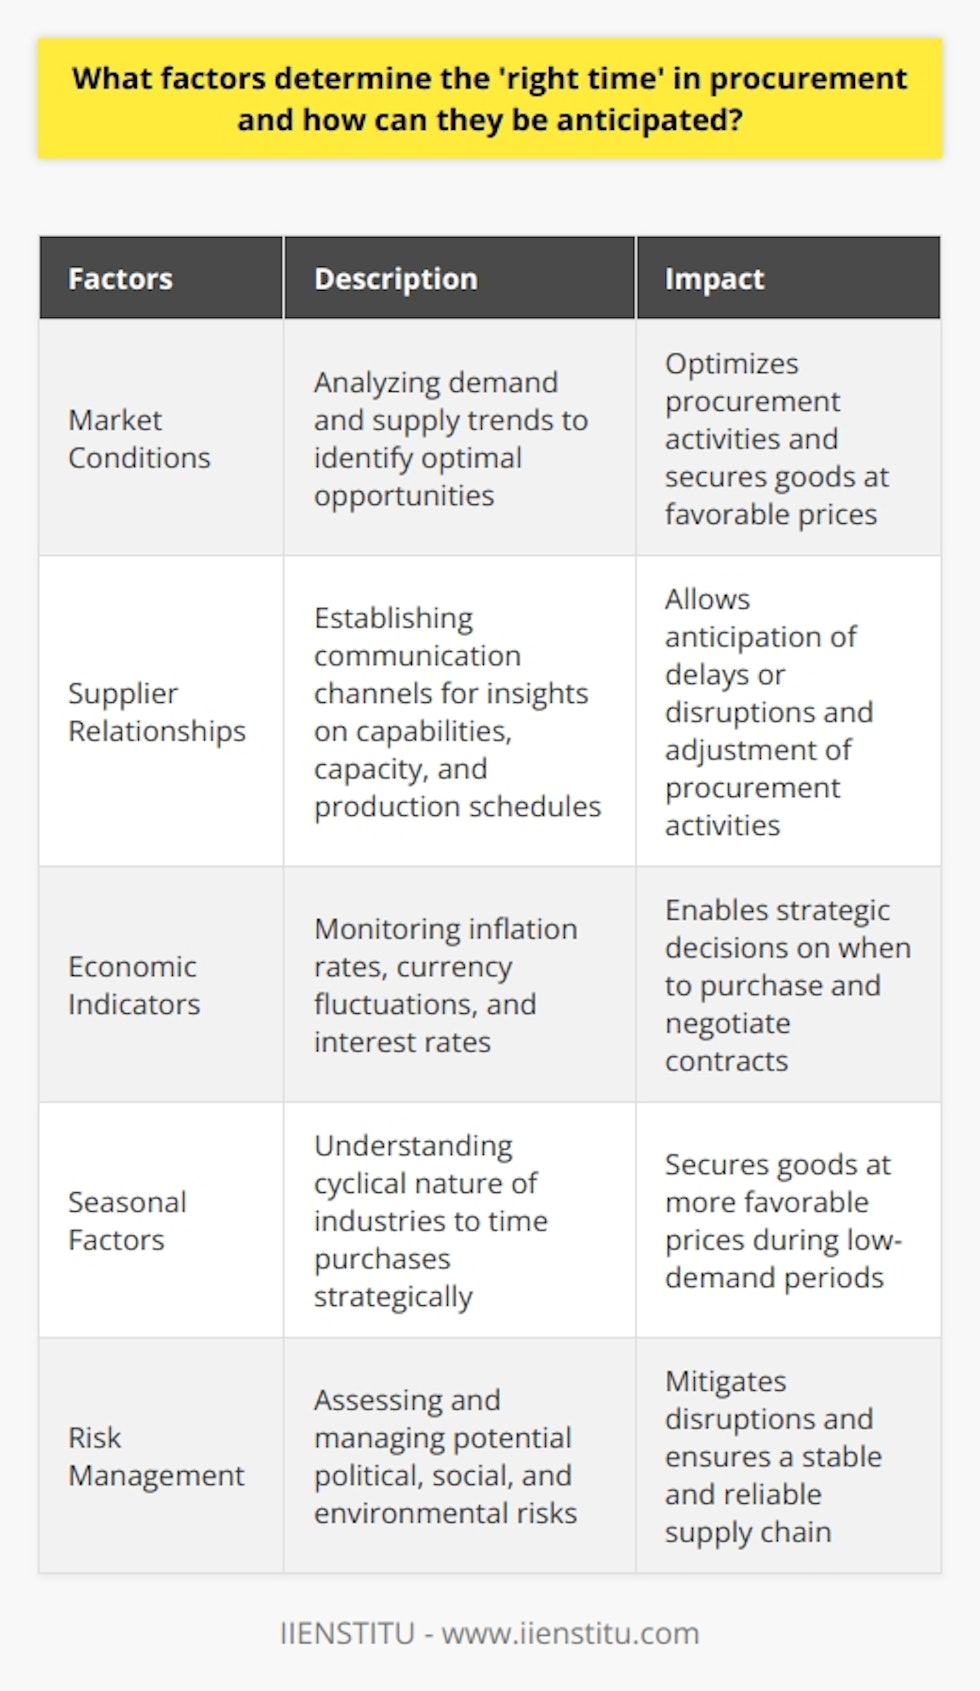 Determining the 'right time' in procurement is a critical aspect that can significantly impact the success of an organization. By considering various factors and anticipating market conditions, procurement professionals can make informed decisions about when to purchase goods and services, ultimately optimizing their procurement activities.One of the key factors to determine the 'right time' in procurement is the assessment of market conditions. By analyzing demand and supply trends, procurement professionals can identify optimal opportunities. For instance, they may decide to purchase goods in bulk when prices are low or delay purchases during high competition periods. By understanding market dynamics, procurement professionals can take advantage of favorable conditions and secure goods and services at more favorable prices.Another crucial aspect that influences the 'right time' in procurement is the management of supplier relationships. Establishing strong communication channels with suppliers enables procurement professionals to have valuable insights into their capabilities, capacity, and production schedules. This knowledge allows them to anticipate any potential delays or disruptions and adjust their procurement activities accordingly. By working closely with suppliers, procurement professionals can foster a collaborative and efficient procurement process.Analyzing economic indicators is another essential factor in anticipating the 'right time' in procurement. By monitoring factors such as inflation rates, currency fluctuations, and interest rates, procurement professionals can make strategic decisions regarding when to purchase and how to negotiate contracts. For example, if the local currency is expected to appreciate in the short term, it may be beneficial to postpone procurement activities to take advantage of more favorable exchange rates. By staying informed about economic trends, procurement professionals can optimize their procurement strategies.Seasonal factors also play a significant role in determining the 'right time' for procurement. Understanding the cyclical nature of certain industries allows procurement professionals to time their purchases strategically. By procuring goods and services during low-demand periods, procurement professionals can secure them at more favorable prices. For instance, purchasing winter clothing or construction materials during off-peak seasons can result in substantial cost savings. Considering seasonal factors enables procurement professionals to optimize procurement timing and drive cost efficiencies.Lastly, effective anticipation of the 'right time' in procurement involves assessing and managing potential risks. Procurement professionals must consider factors such as political, social, and environmental risks that may impact their supply chains. By proactively addressing these risks, procurement teams can mitigate potential disruptions and ensure a stable and reliable supply chain. This risk management approach enhances the ability to determine the optimal time for procurement activities.In summary, determining the 'right time' in procurement involves considering multiple factors, including market conditions, supplier relationships, economic indicators, seasonal factors, and risk management. By carefully assessing these elements and anticipating future trends, procurement professionals can make strategic decisions that add value to their organizations and contribute to their overall success.